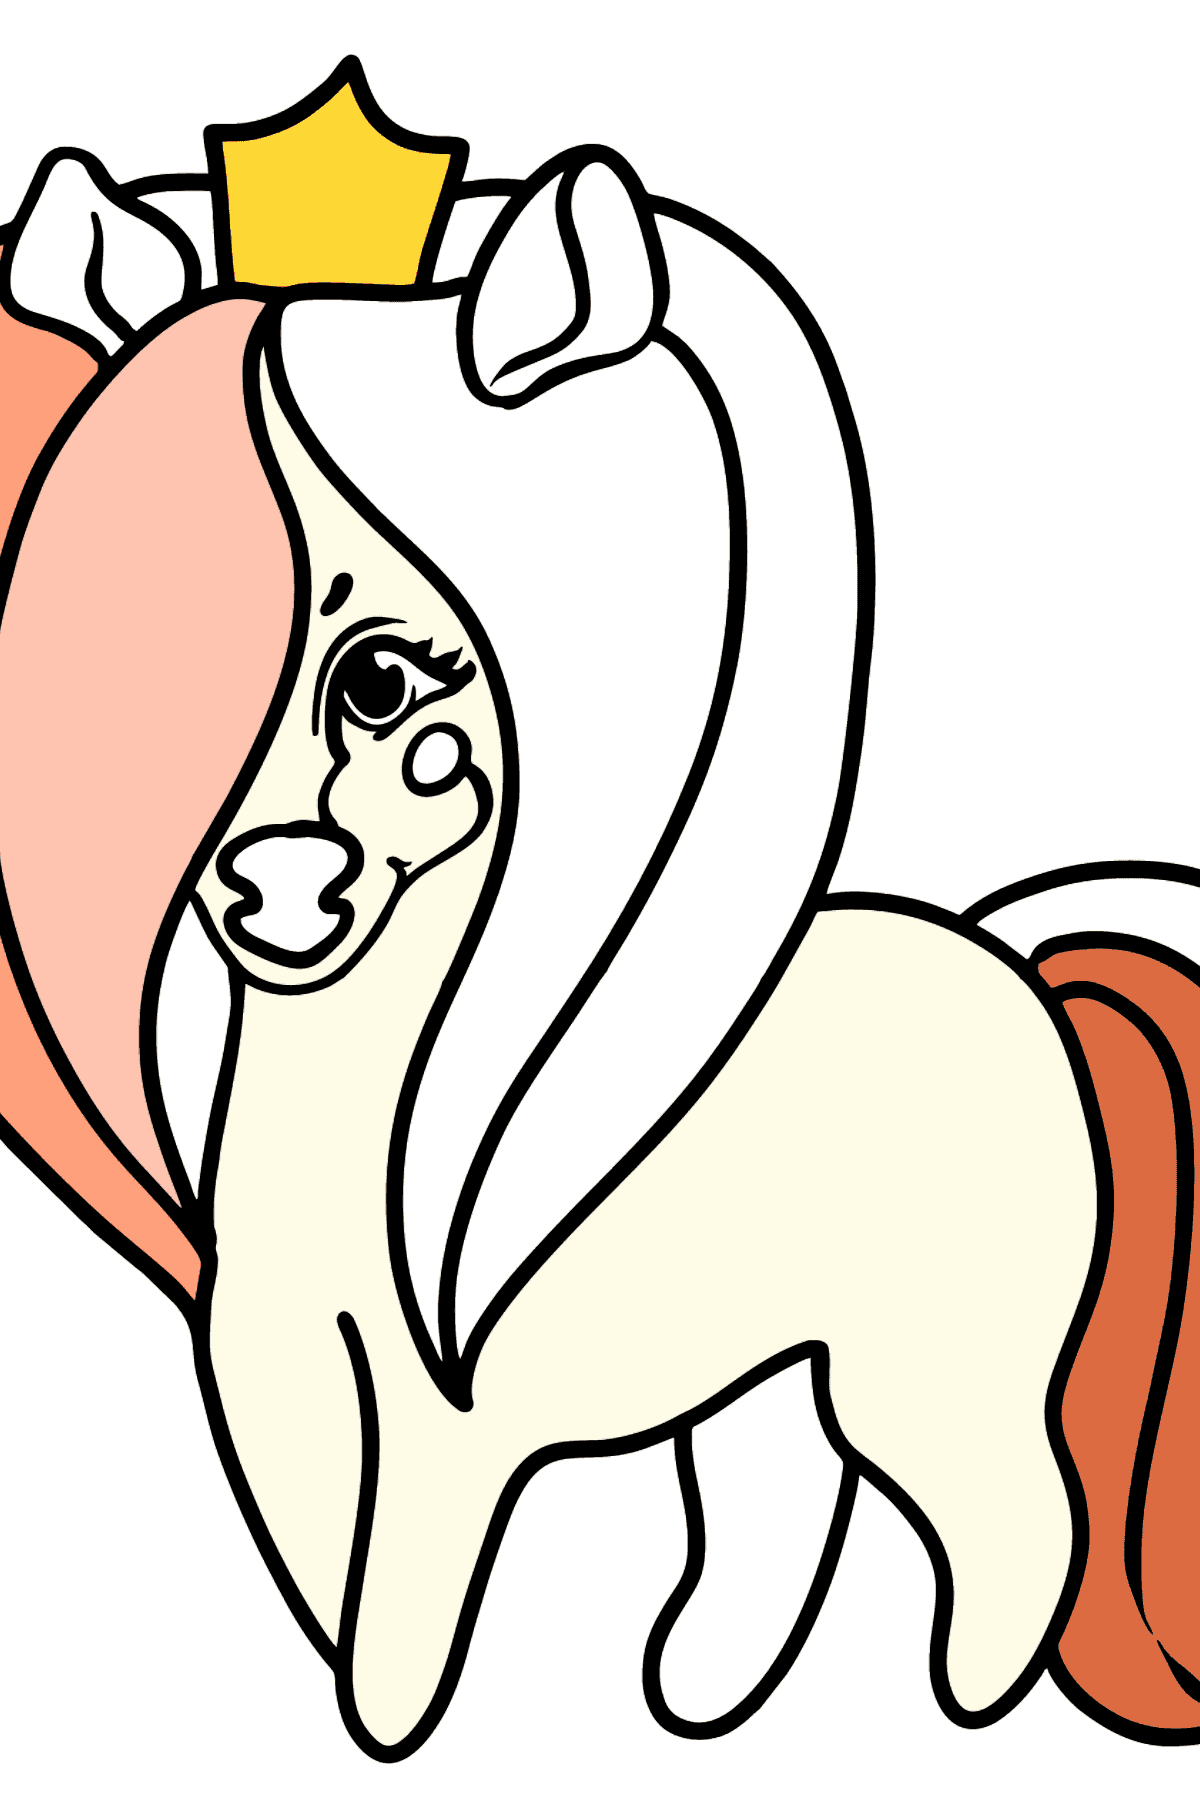 Pony Princess coloring page - Coloring Pages for Kids